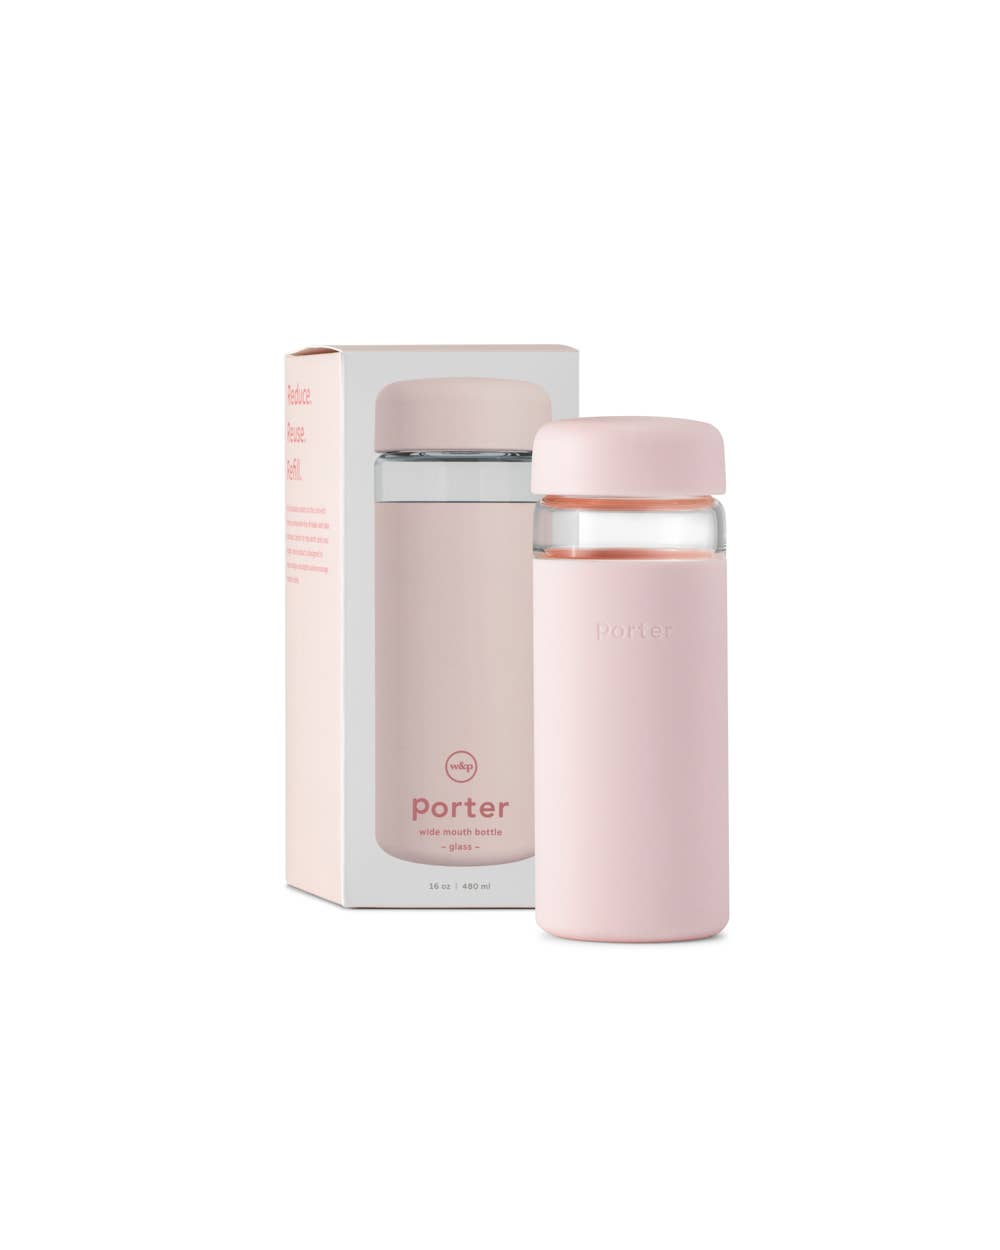 Porter Wide Mouth Reusable Glass Water Bottle: Blush